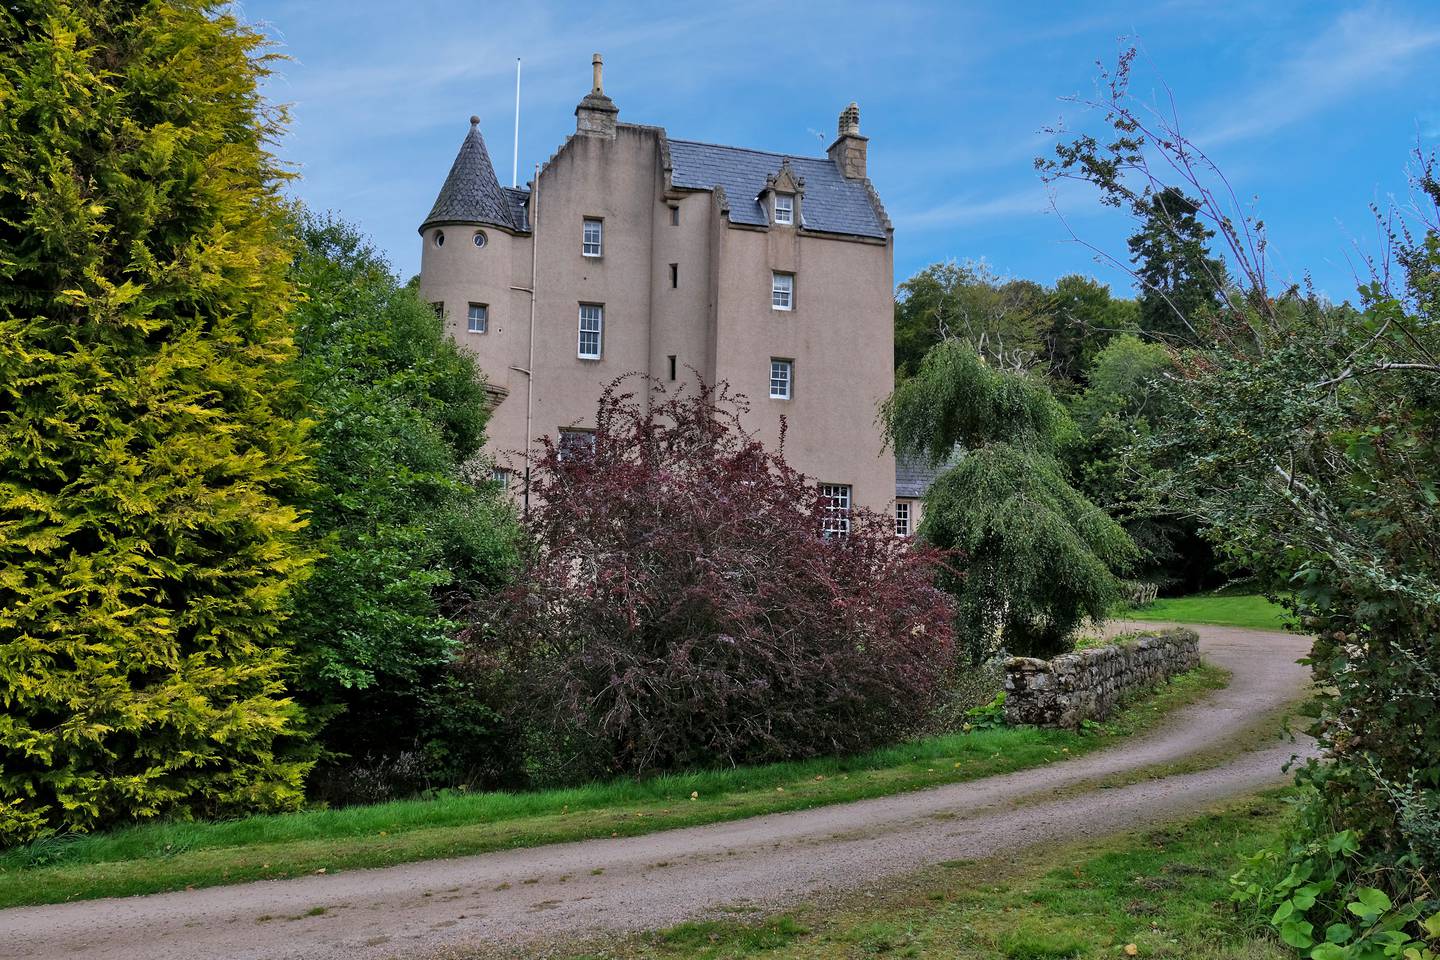 Lickleyhead Castle is in Aberdeenshire, Scotland, and offers the perfect spot to watch the 'House of the Dragon' premiere. Photo: James Davies